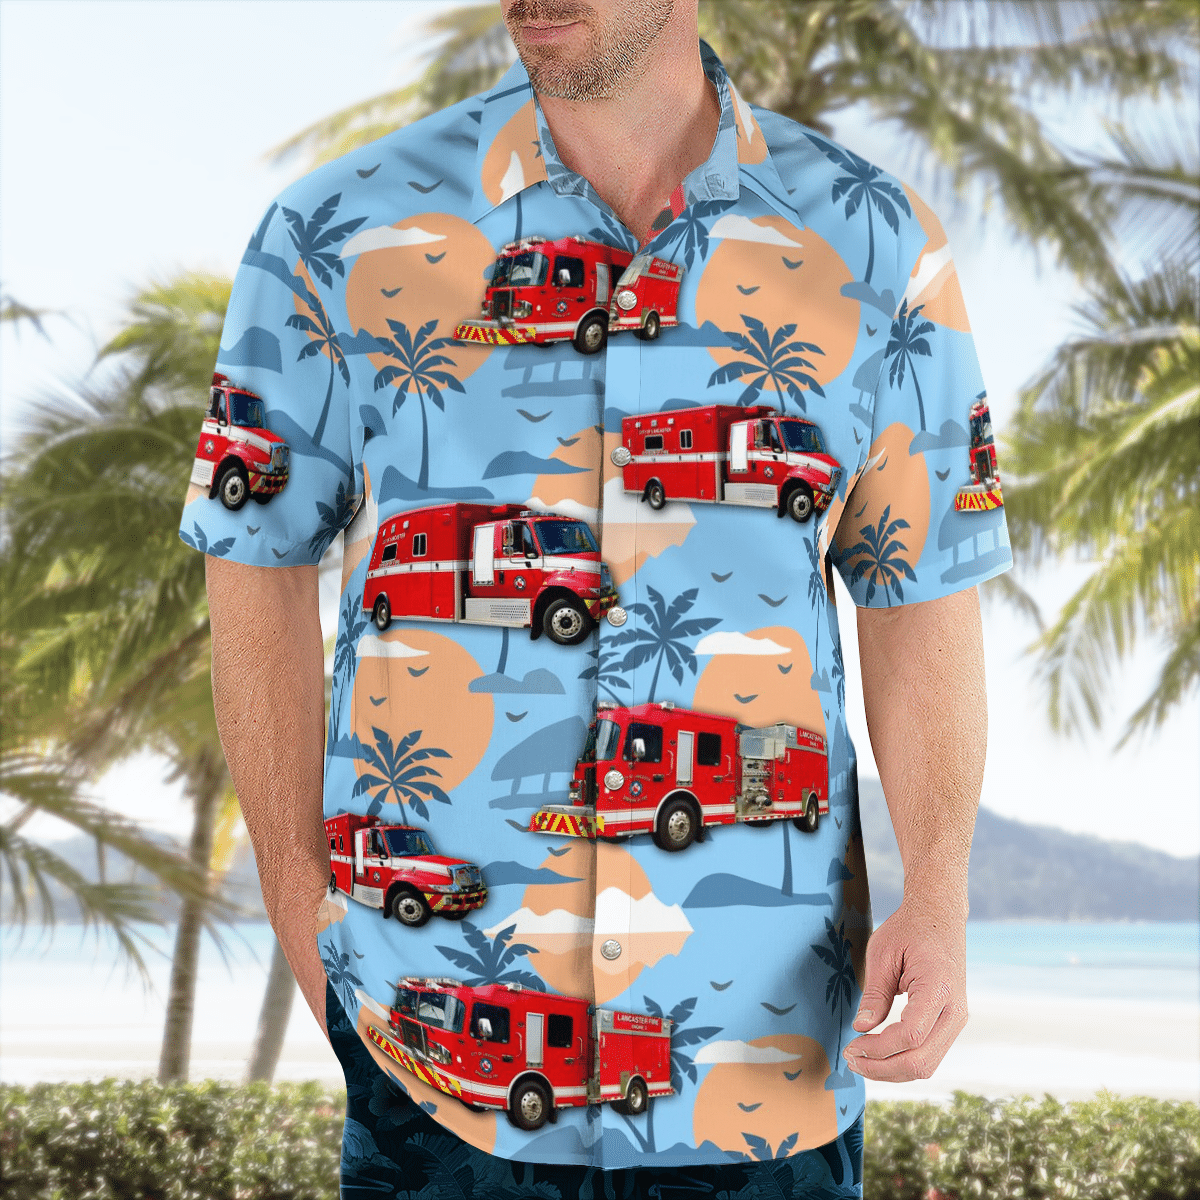 There are several styles of beach and Hawaiian shorts and tops to choose from 100